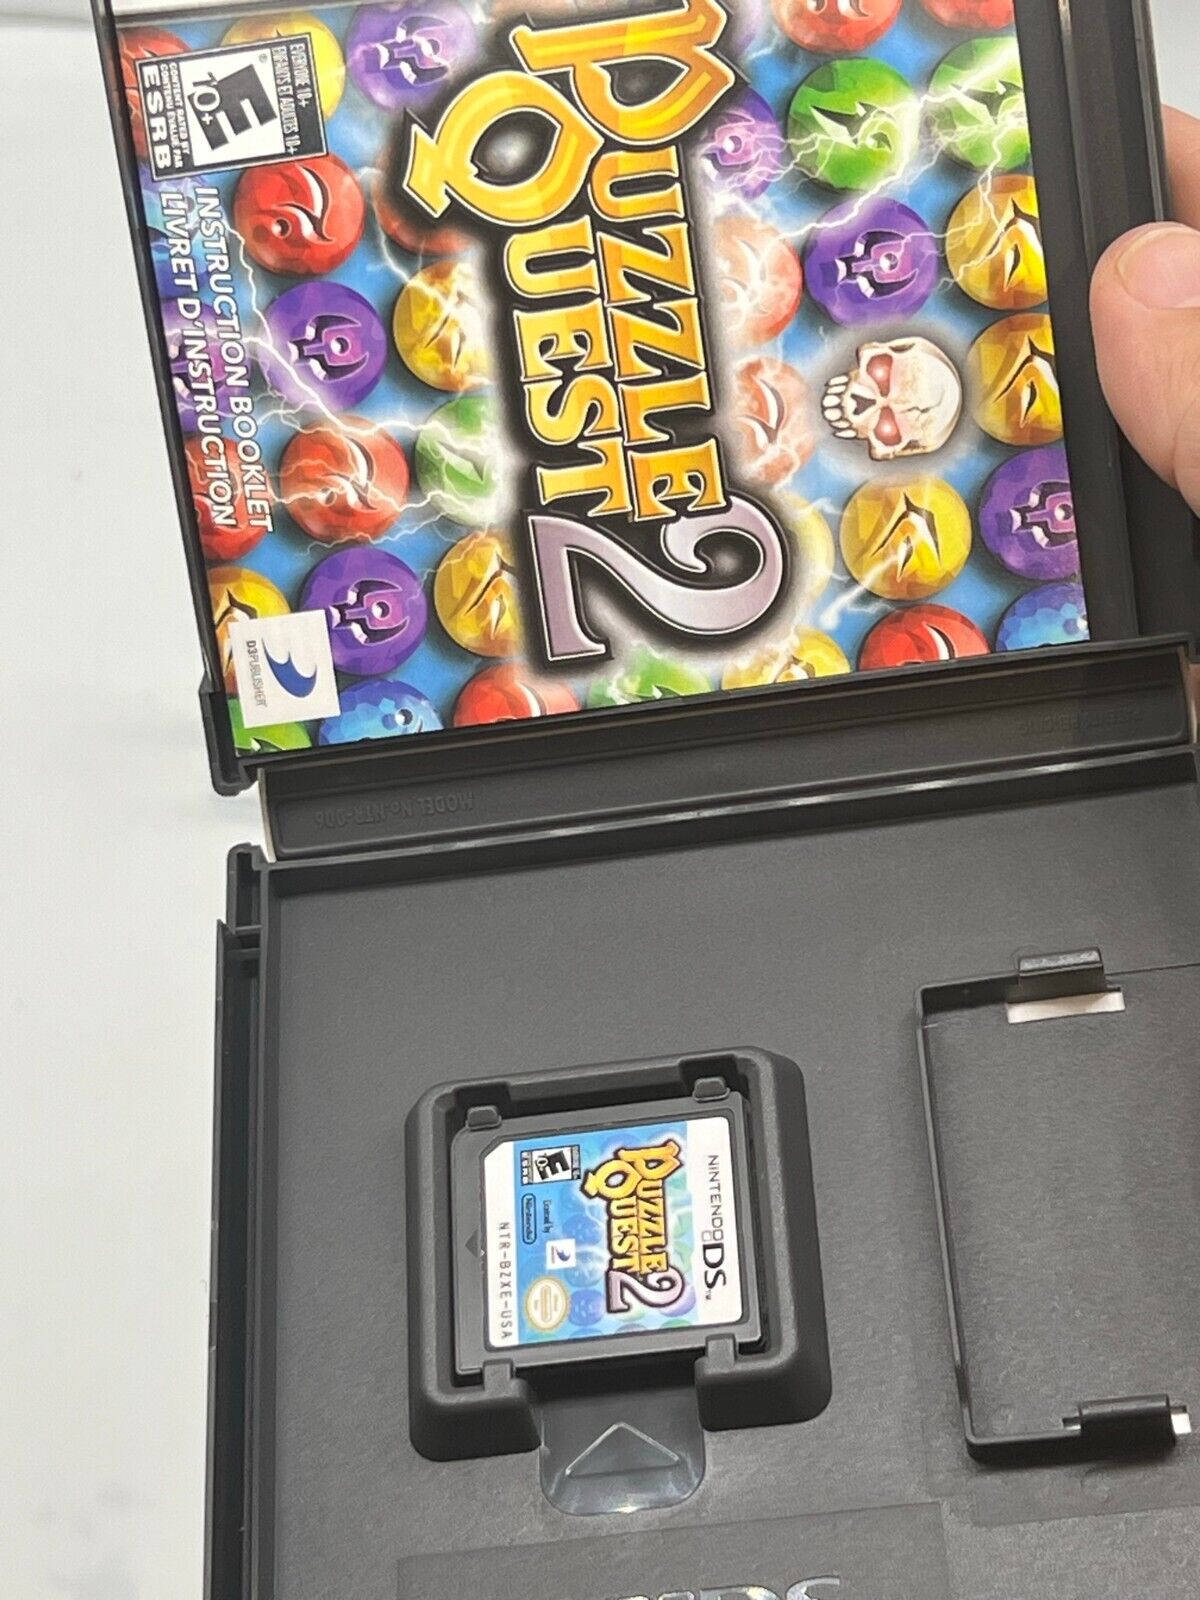 Puzzle Quest 2 (Nintendo DS, 2009) - Tested